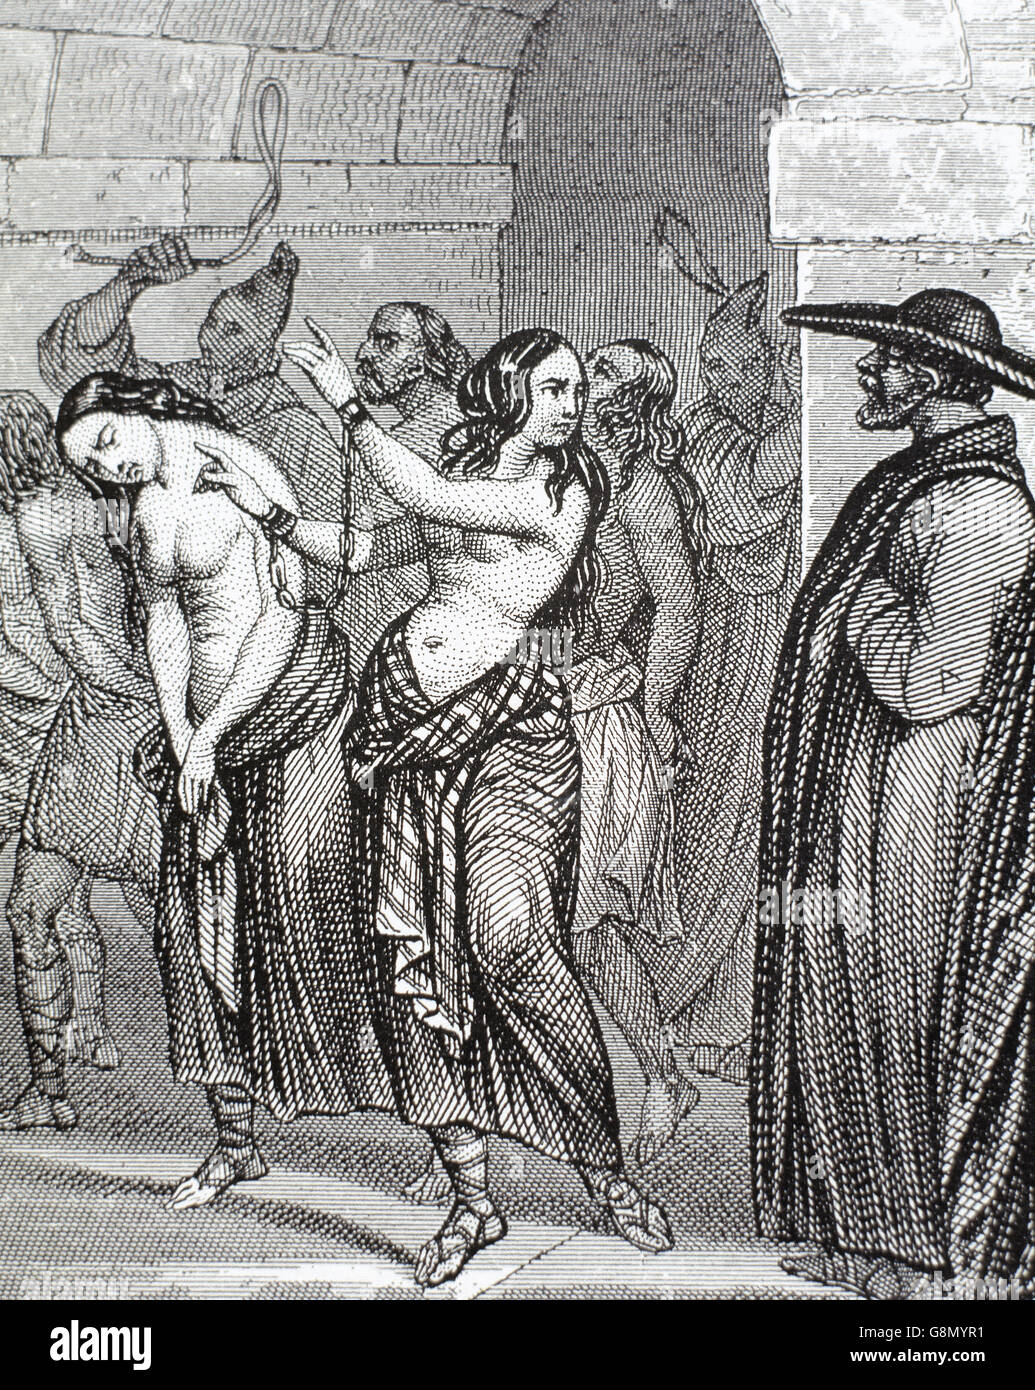 Middle Ages. Women accused of witchcraft leading to prison. Engraving, 19th century. Stock Photo